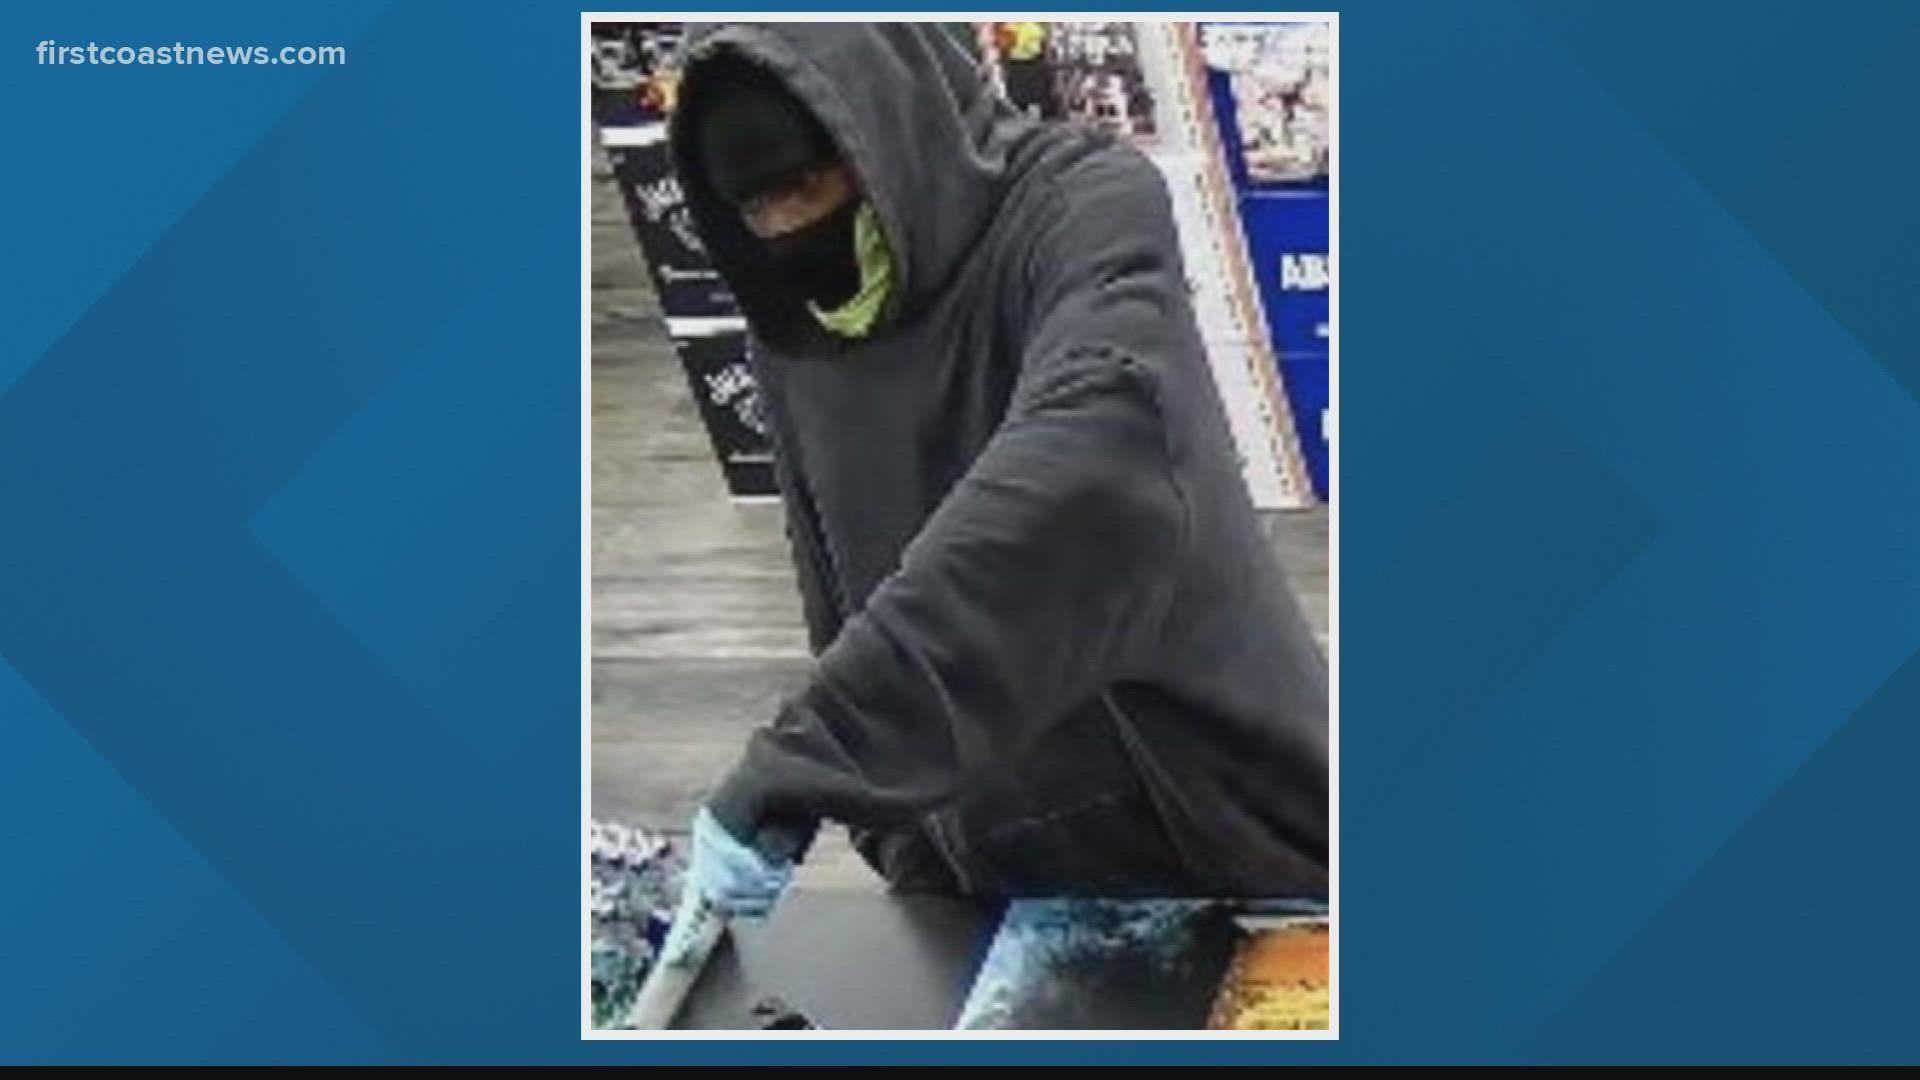 Officers say the person pictured entered a business, displayed a firearm and demanded money from the employees.